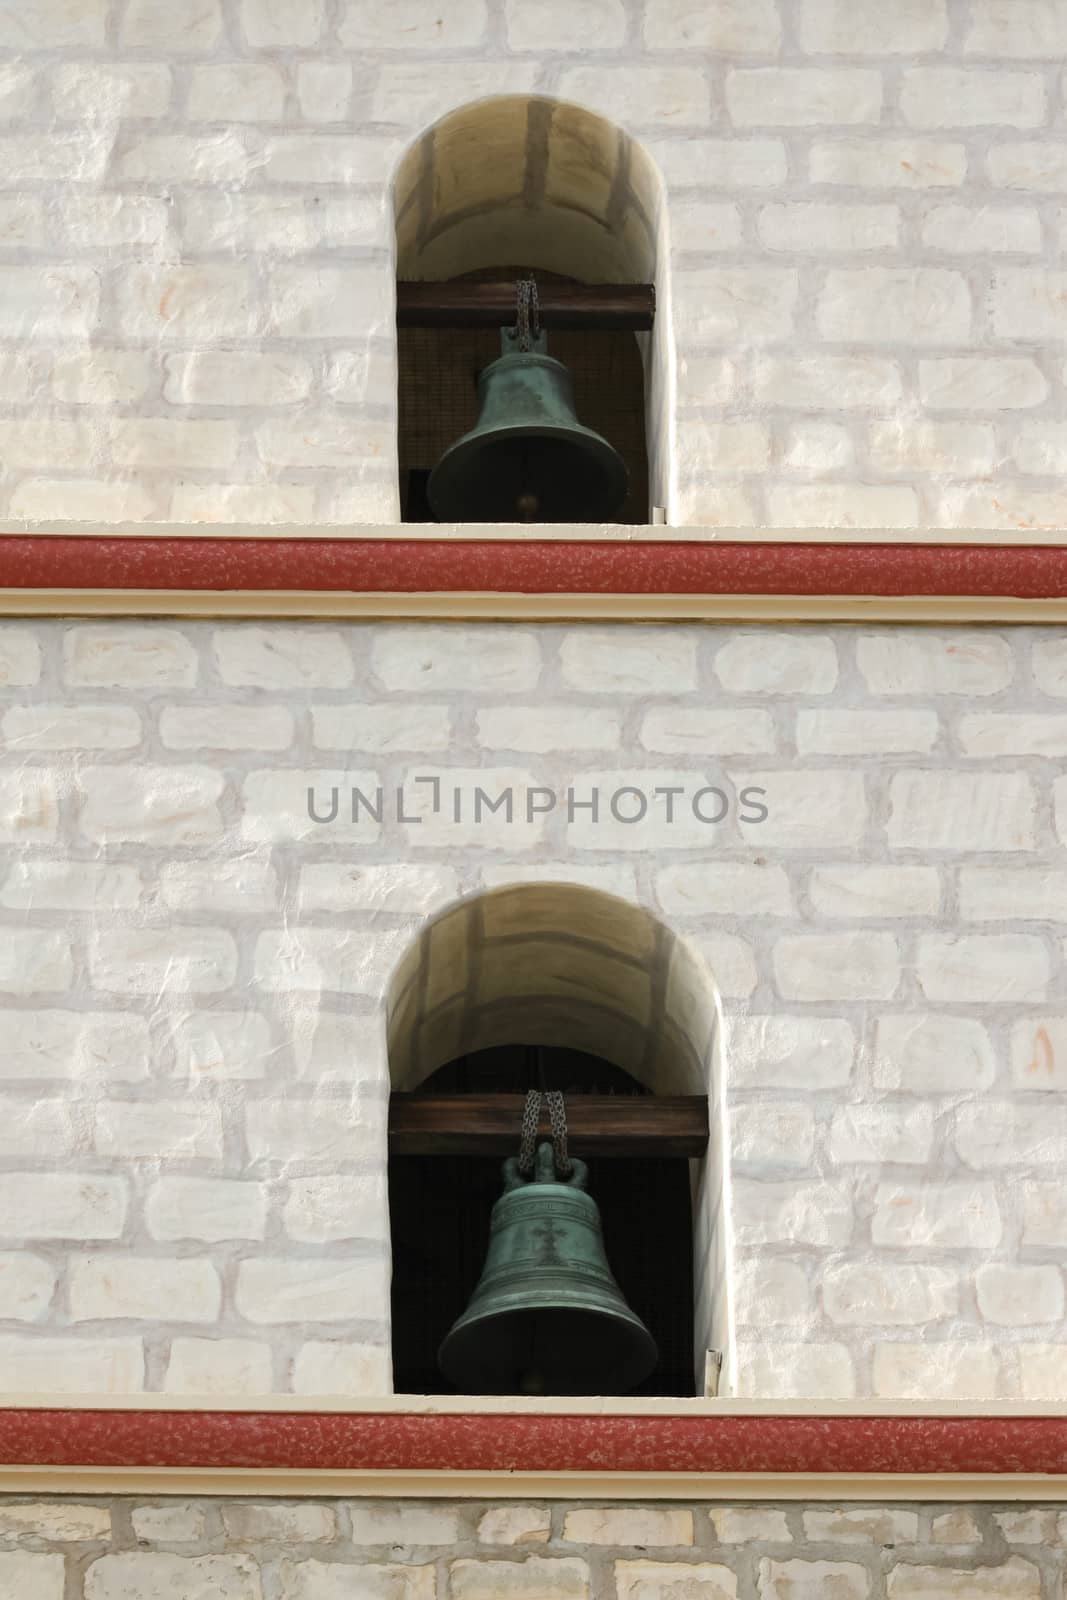 Focus on two of the Santa Barbara Mission bells.